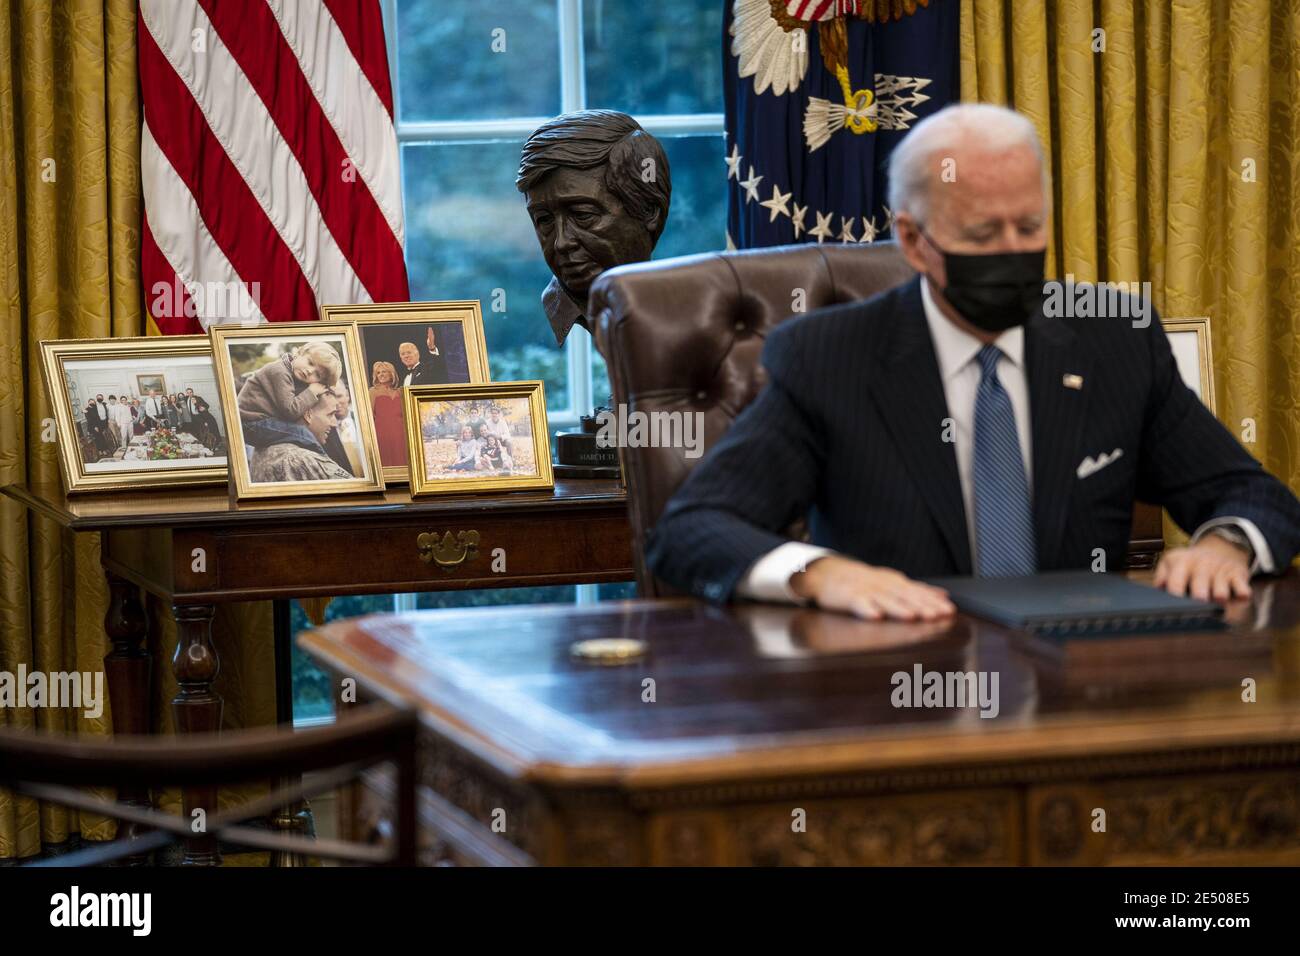 Washington, United States. 25th Jan, 2021. Family pictures are seen behind President Joe Biden as he signs an executive order reversing a Trump era ban on transgender serving in the military, in the Oval Office at the White House, Monday, January 25, 2021in Washington, DC. Pool Photo by Doug Mills/UPI Credit: UPI/Alamy Live News Stock Photo